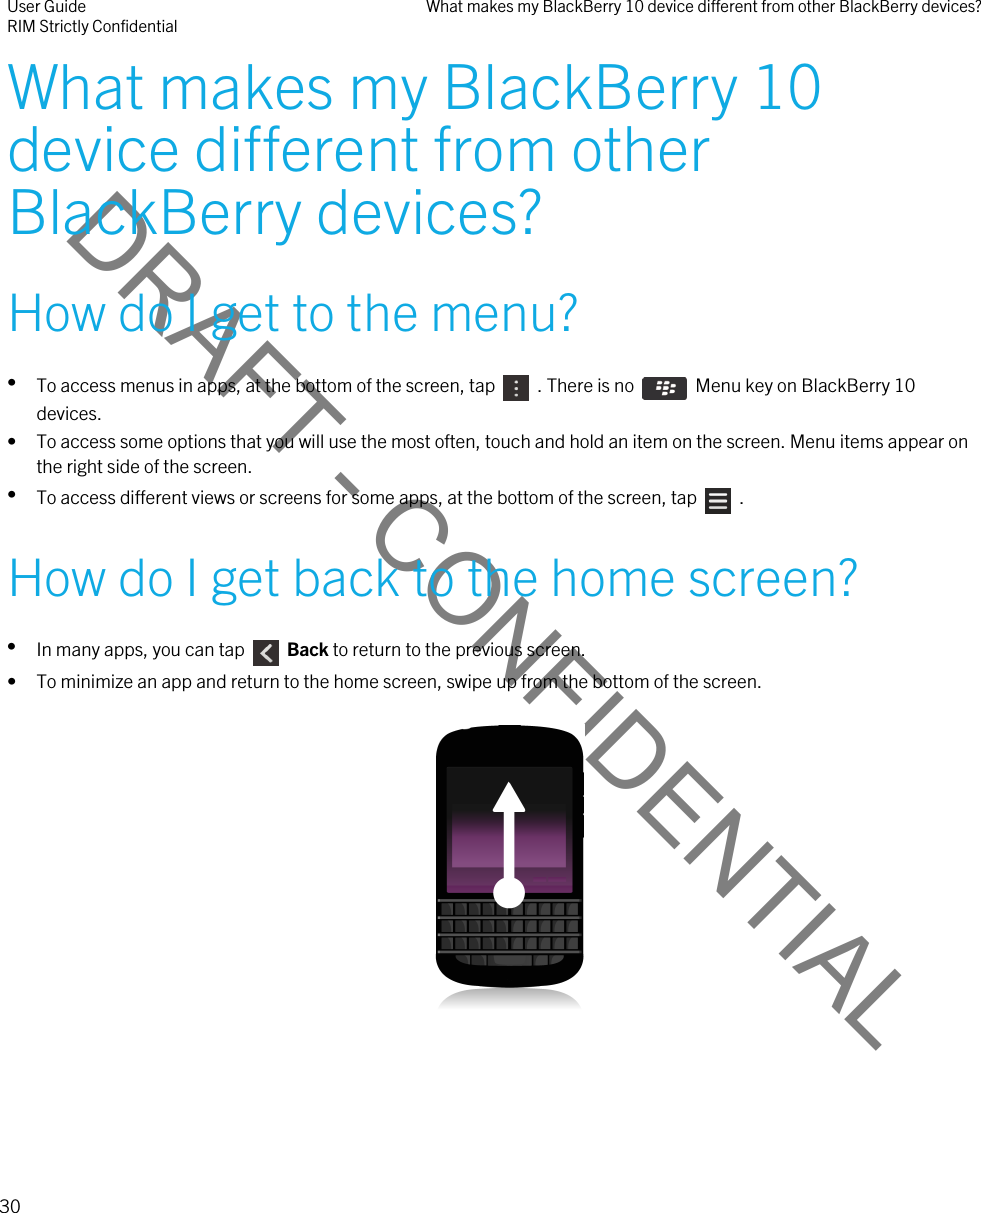 DRAFT - CONFIDENTIALWhat makes my BlackBerry 10 device different from other BlackBerry devices?How do I get to the menu?•To access menus in apps, at the bottom of the screen, tap    . There is no    Menu key on BlackBerry 10 devices.• To access some options that you will use the most often, touch and hold an item on the screen. Menu items appear on the right side of the screen.•To access different views or screens for some apps, at the bottom of the screen, tap    .How do I get back to the home screen?•In many apps, you can tap    Back to return to the previous screen.• To minimize an app and return to the home screen, swipe up from the bottom of the screen.  User GuideRIM Strictly Confidential What makes my BlackBerry 10 device different from other BlackBerry devices?30 